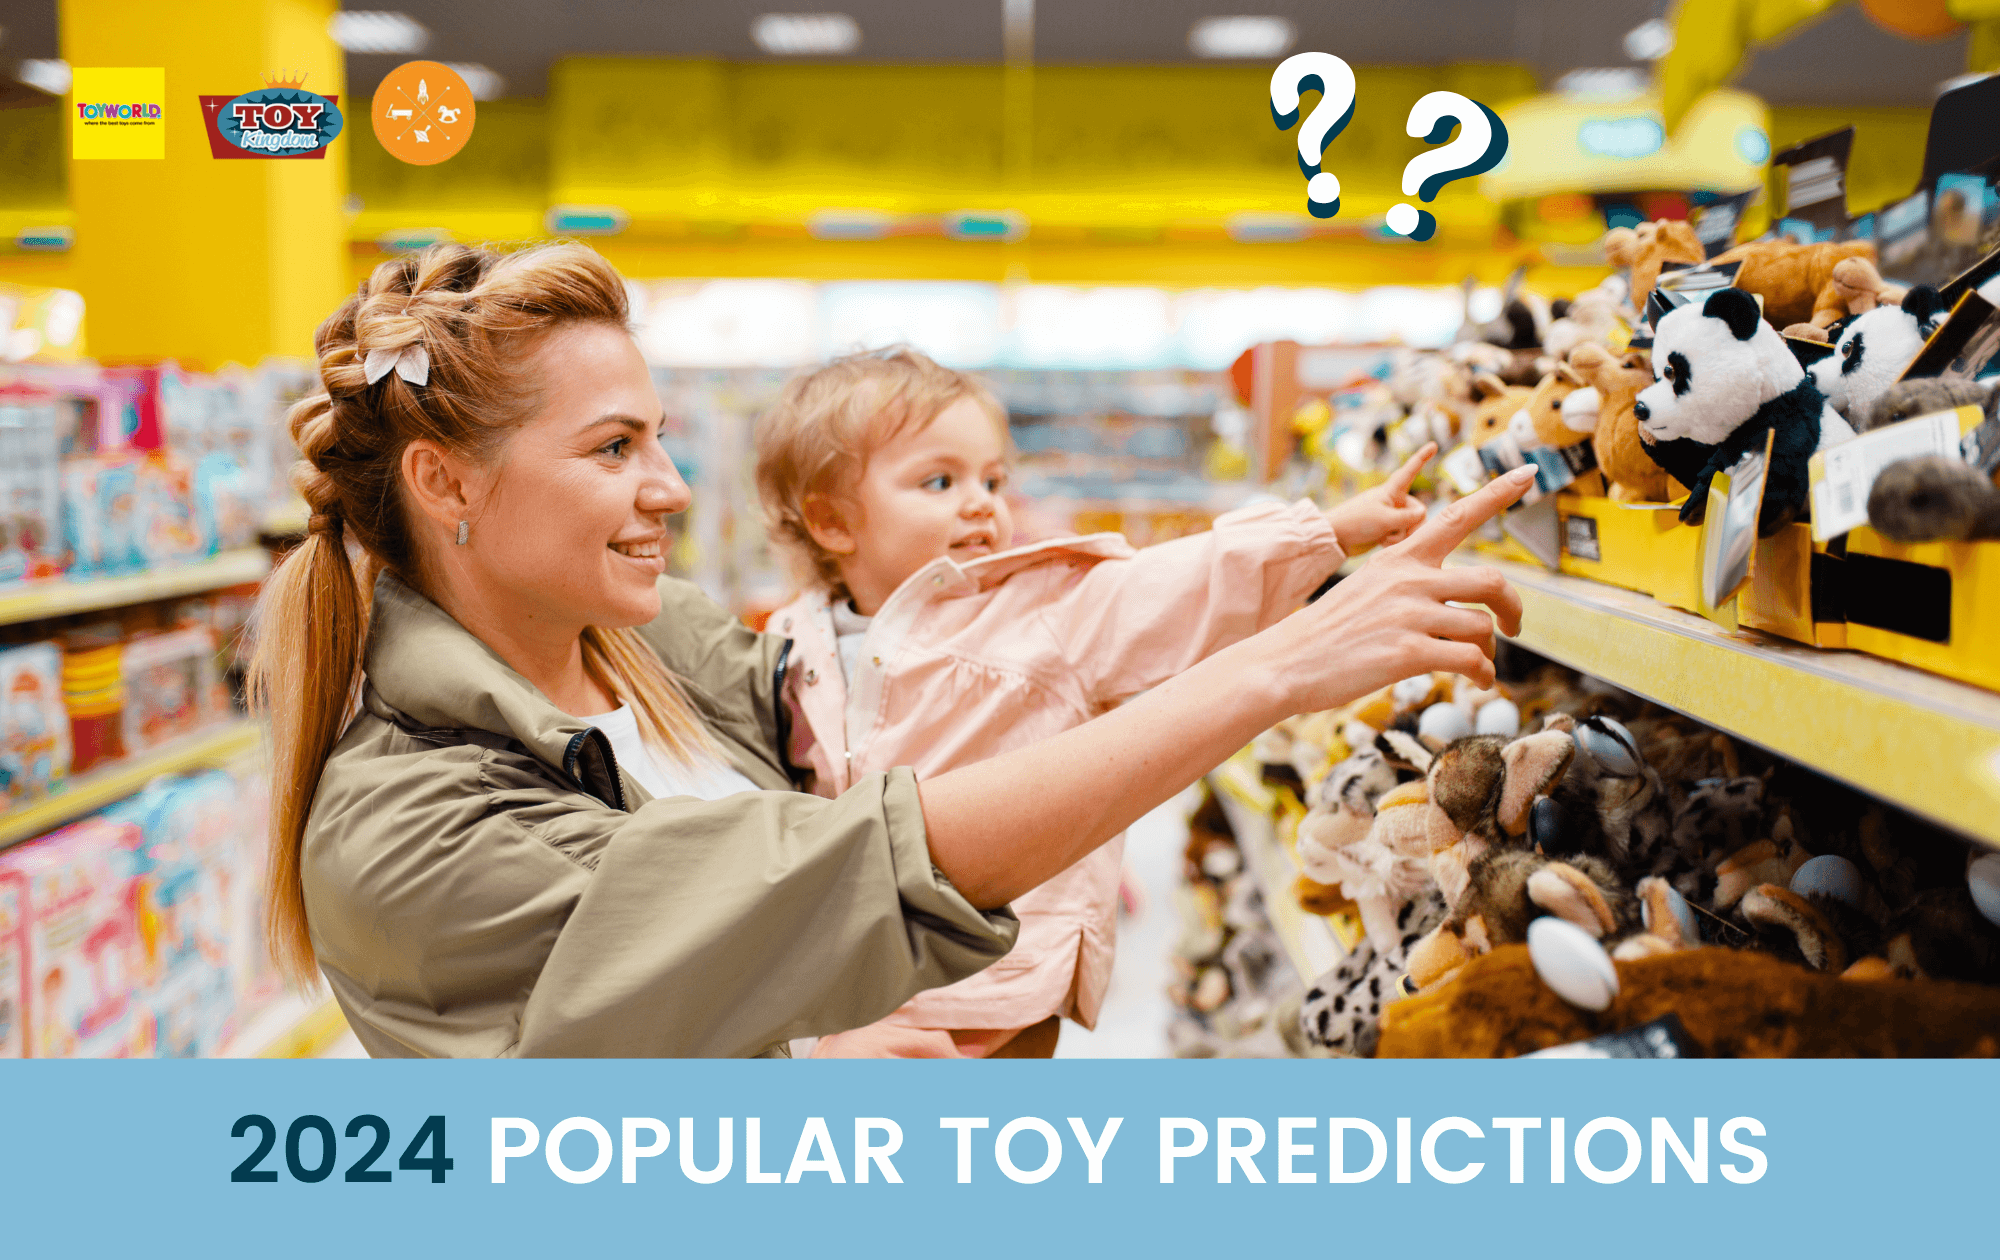 Toys, Tech, Trends and More! The Best Gifts for Kids in 2024 My